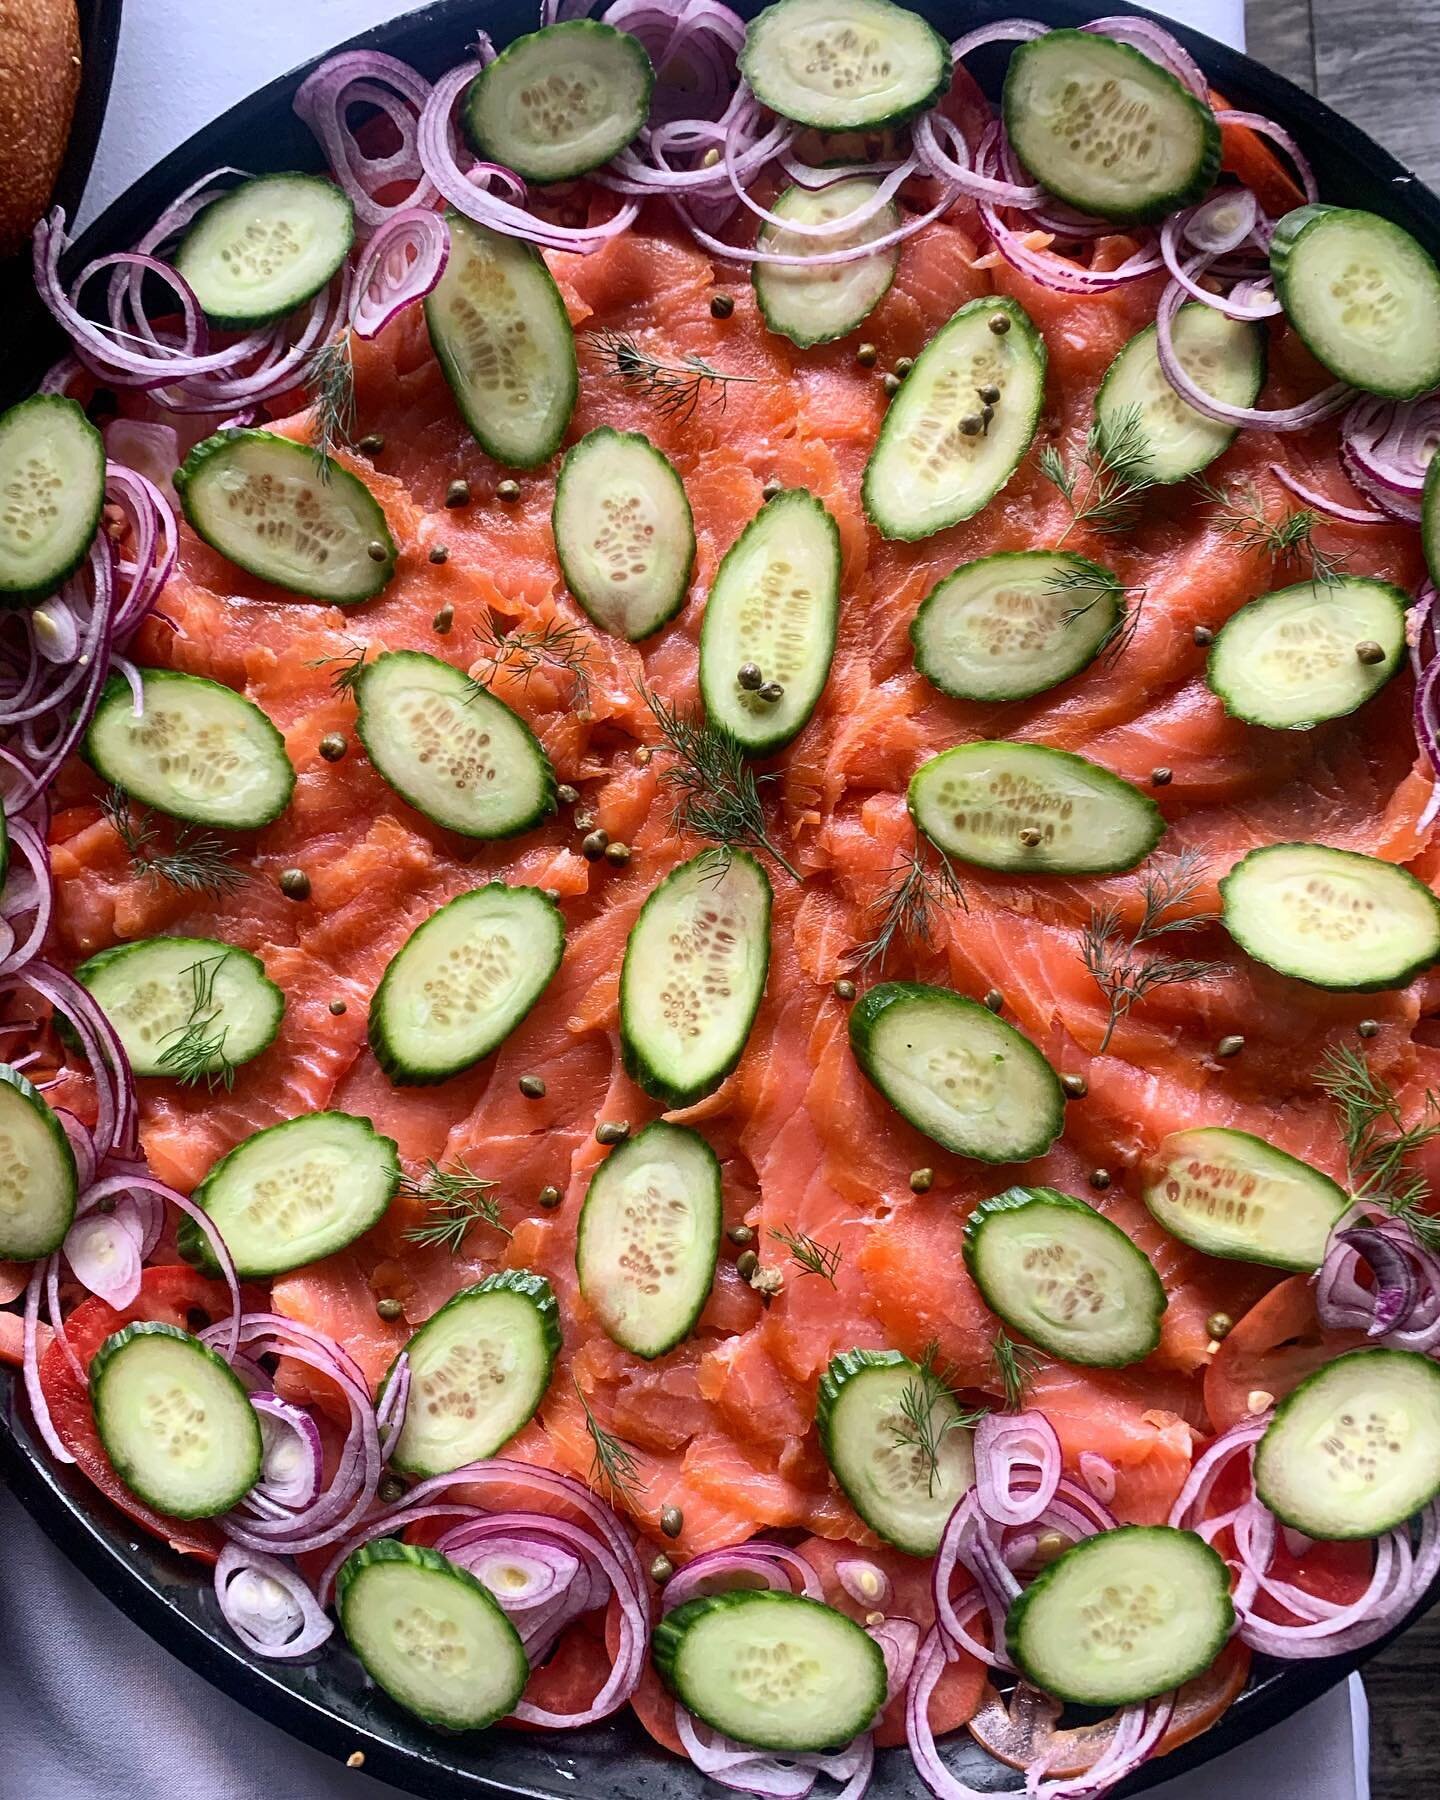 We&rsquo;re now taking catering orders for Easter Weekend! Try our Bagel Platter Deluxe that comes with this beautiful Lox platter. Lox platter is also available on its own for Passover celebrations next week. Full catering menu is on our website. Se